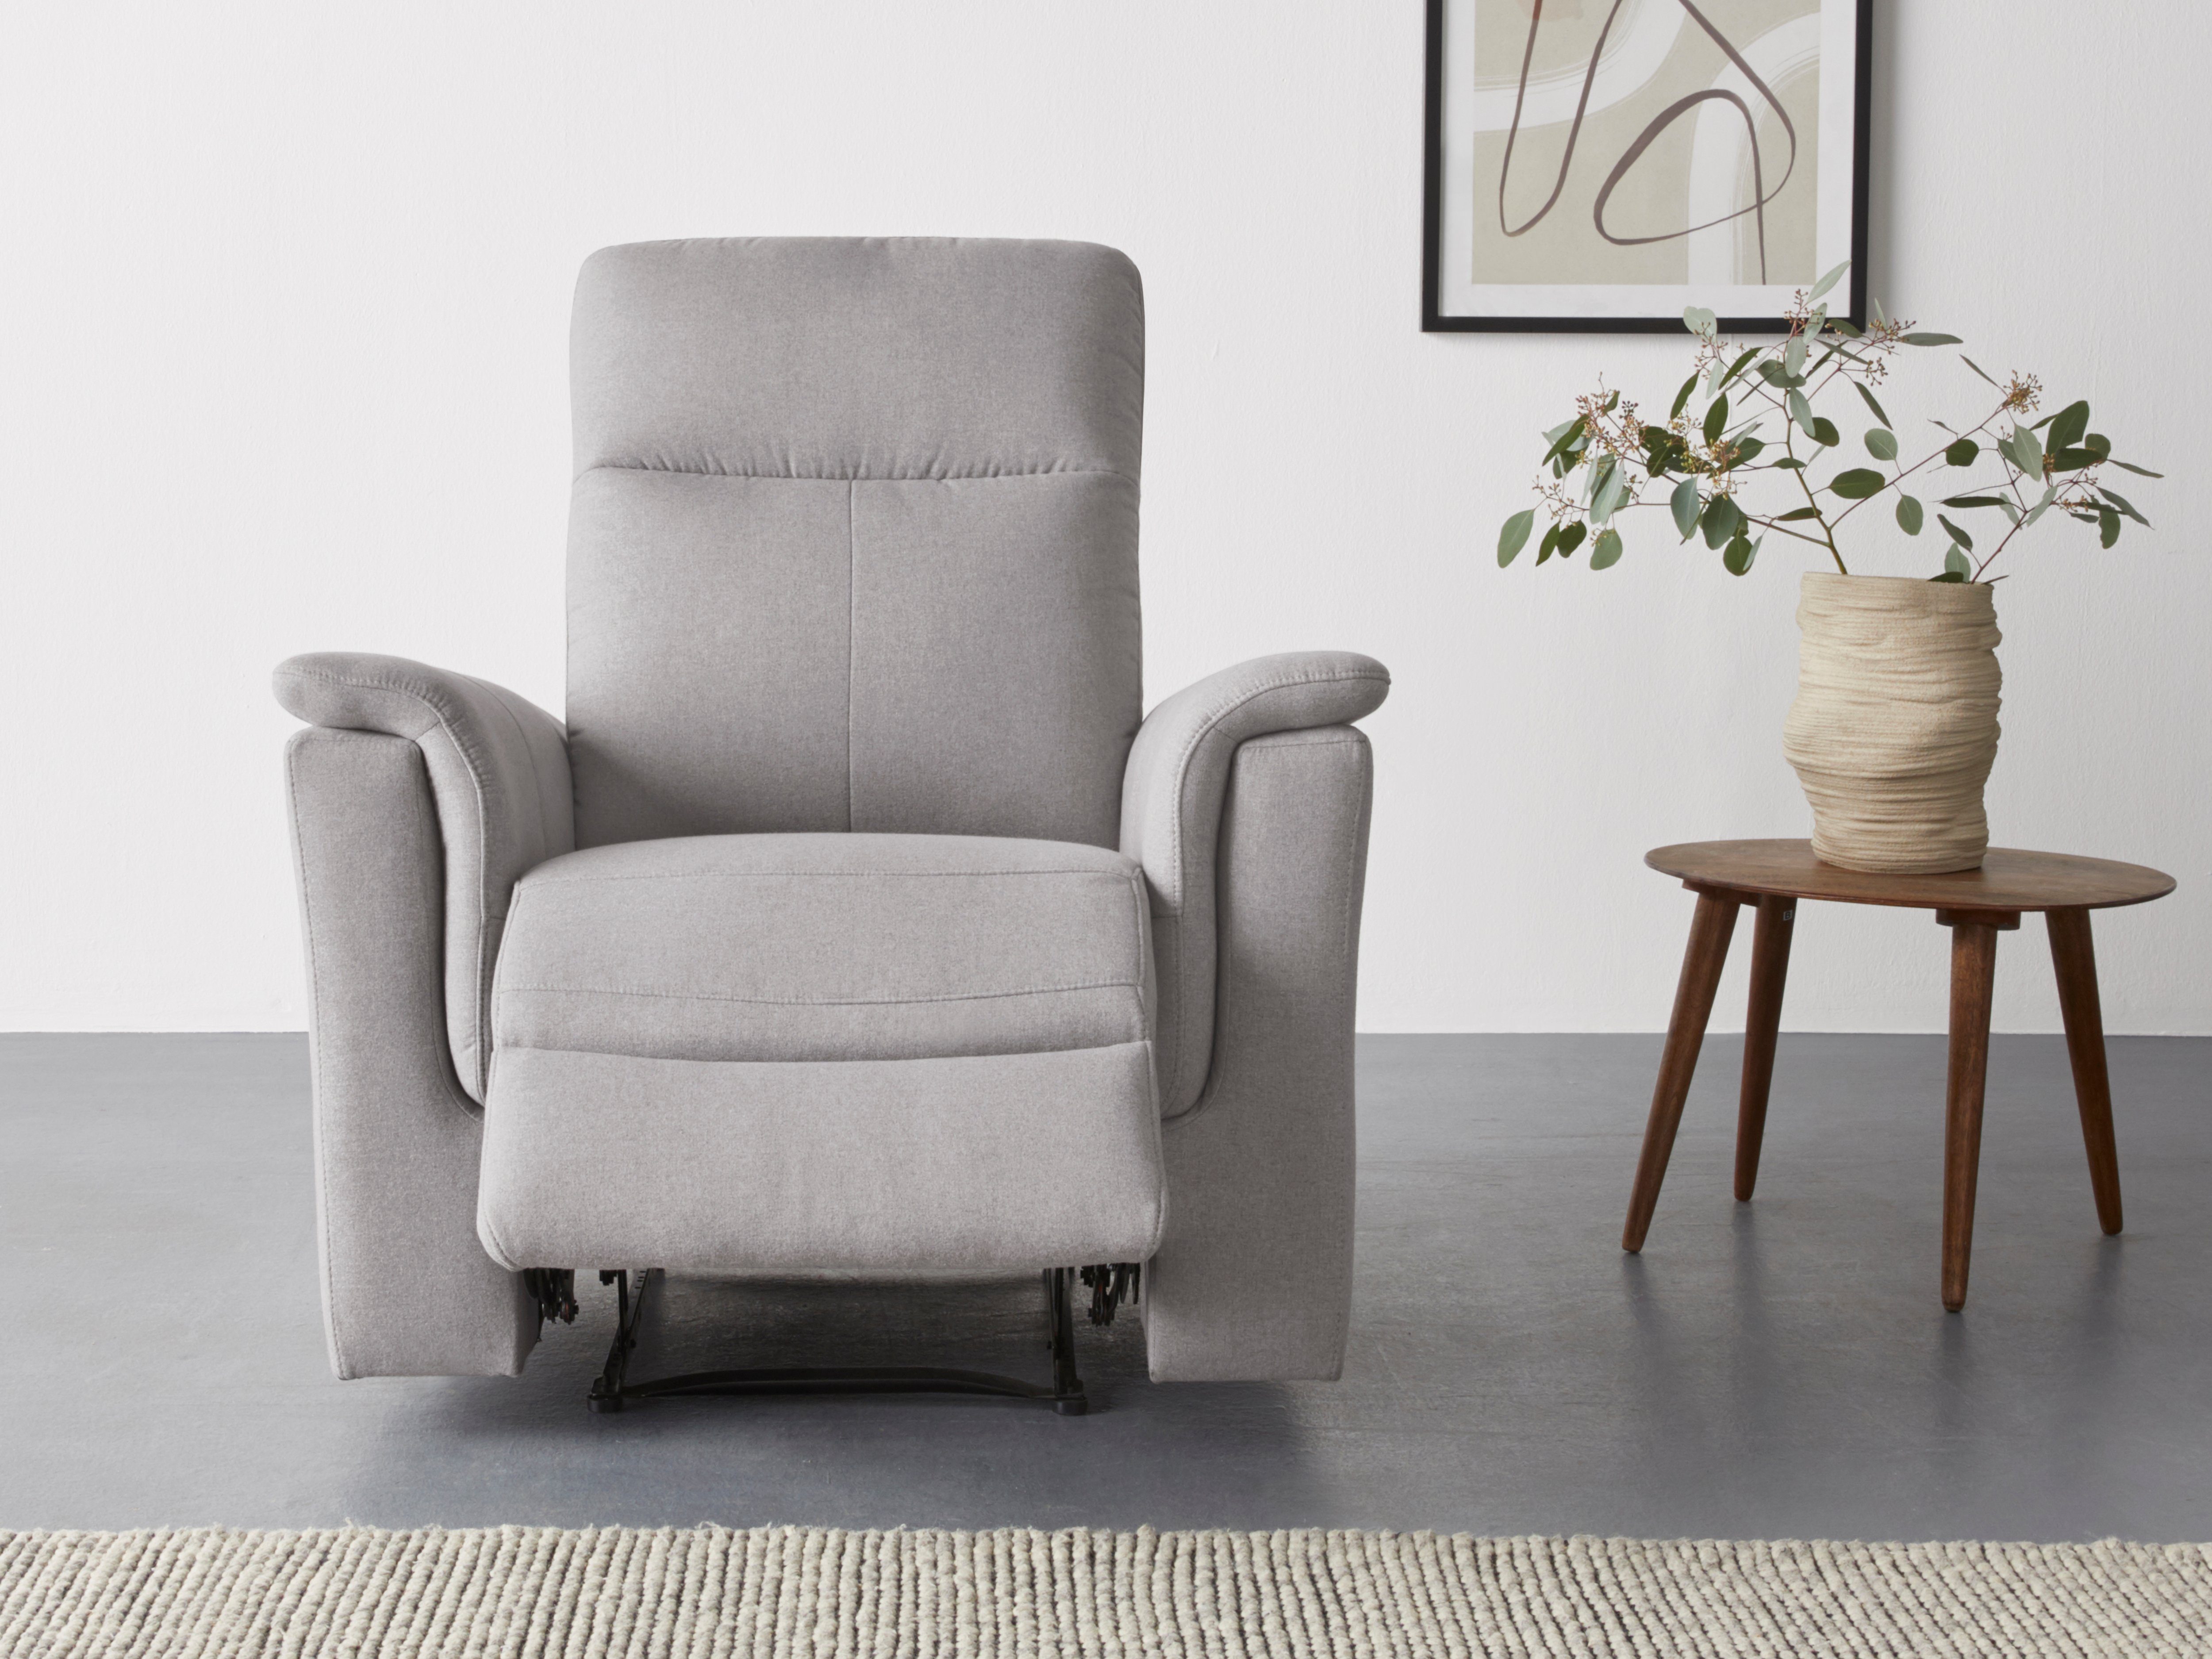 Timbers Relaxfauteuil Southbrook